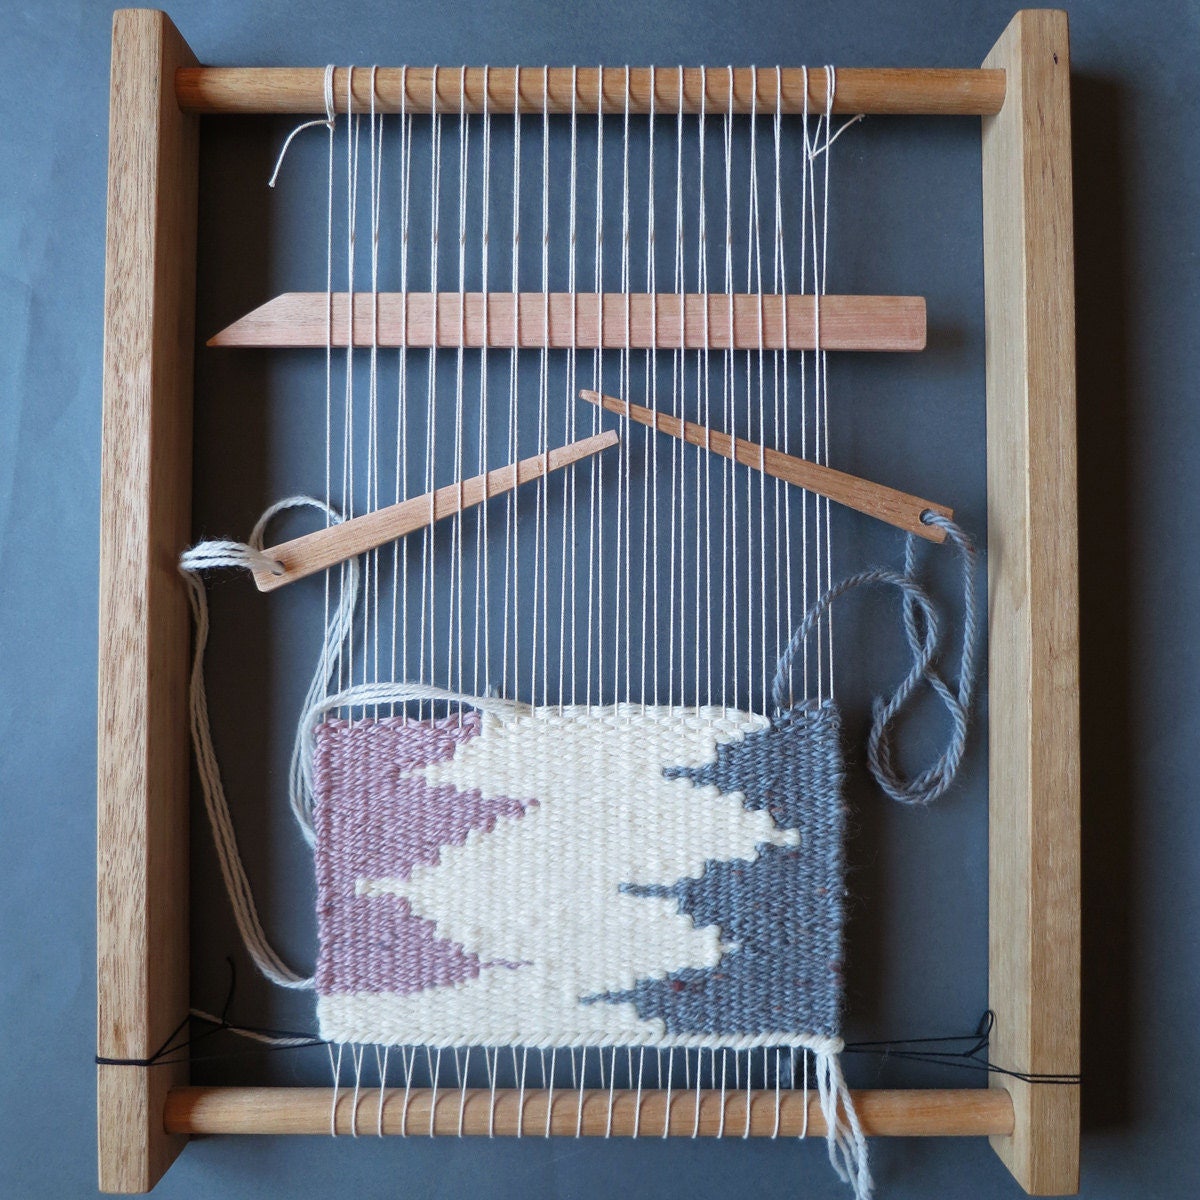 Weave and Looms: Yarn, for More than Just Knit and Crochet